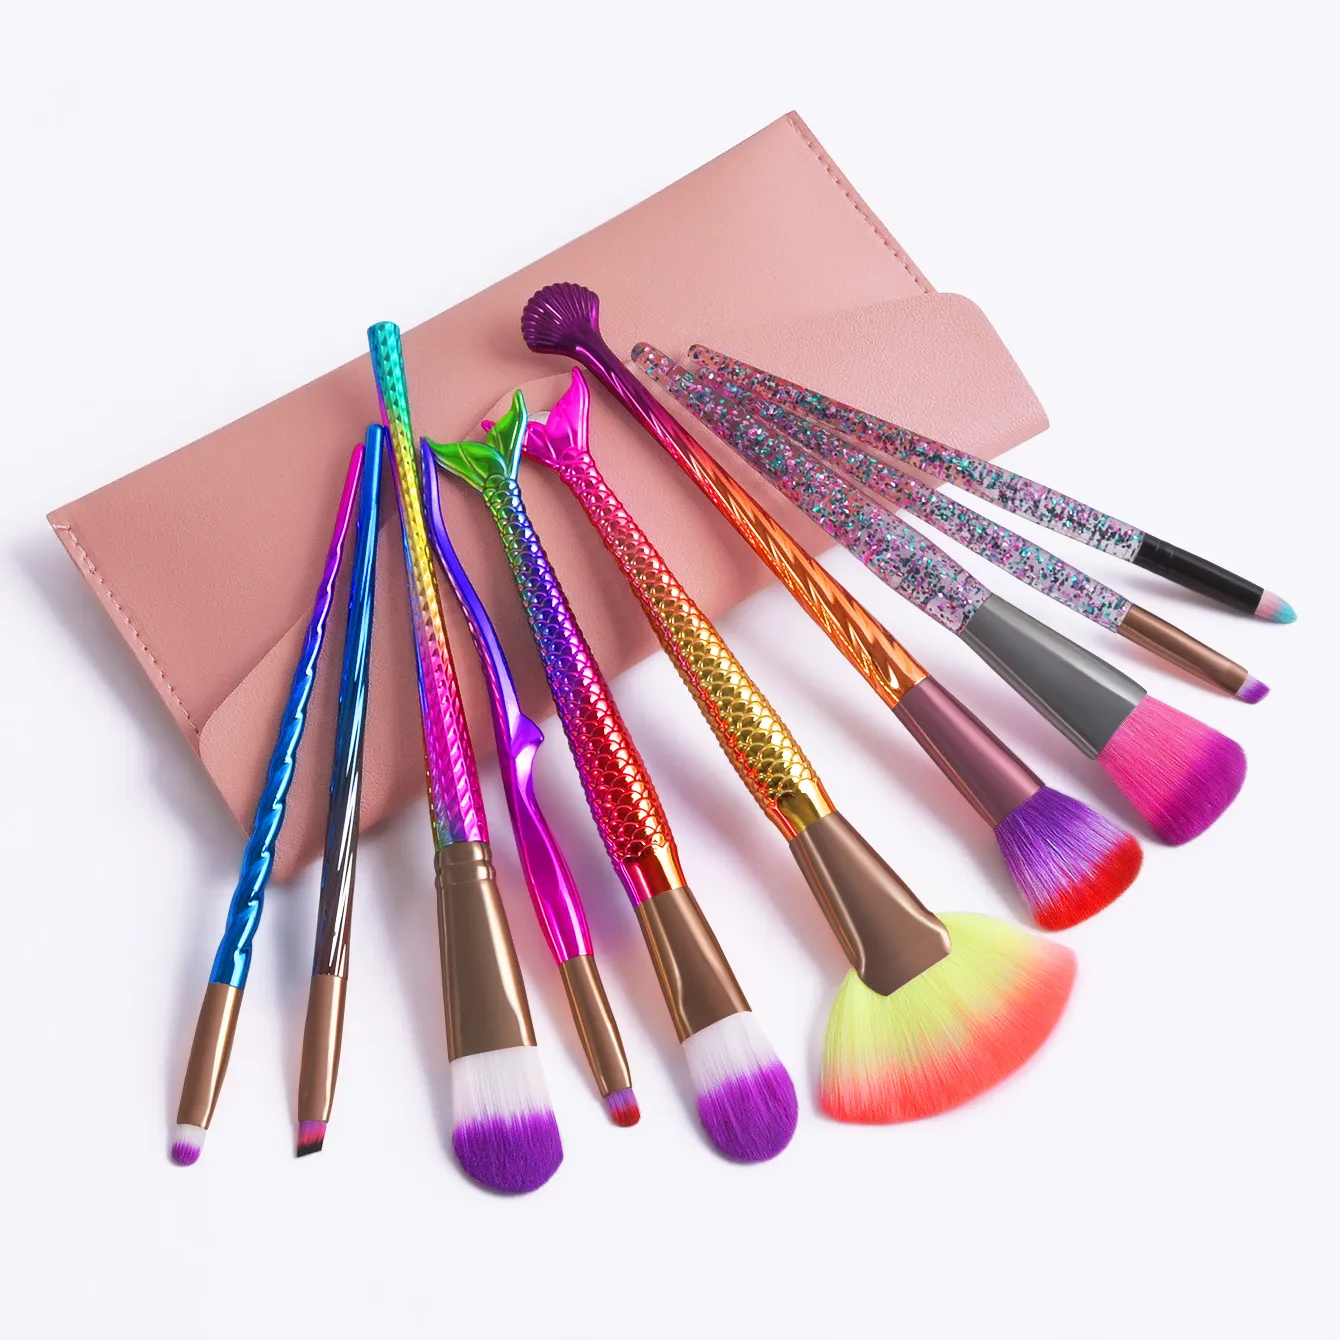 New 10 pcs Multi-color Mermaid Makeup Brush Set With Makeup Brush Bag Cosmetic Tools Gift Girls Beauty Products